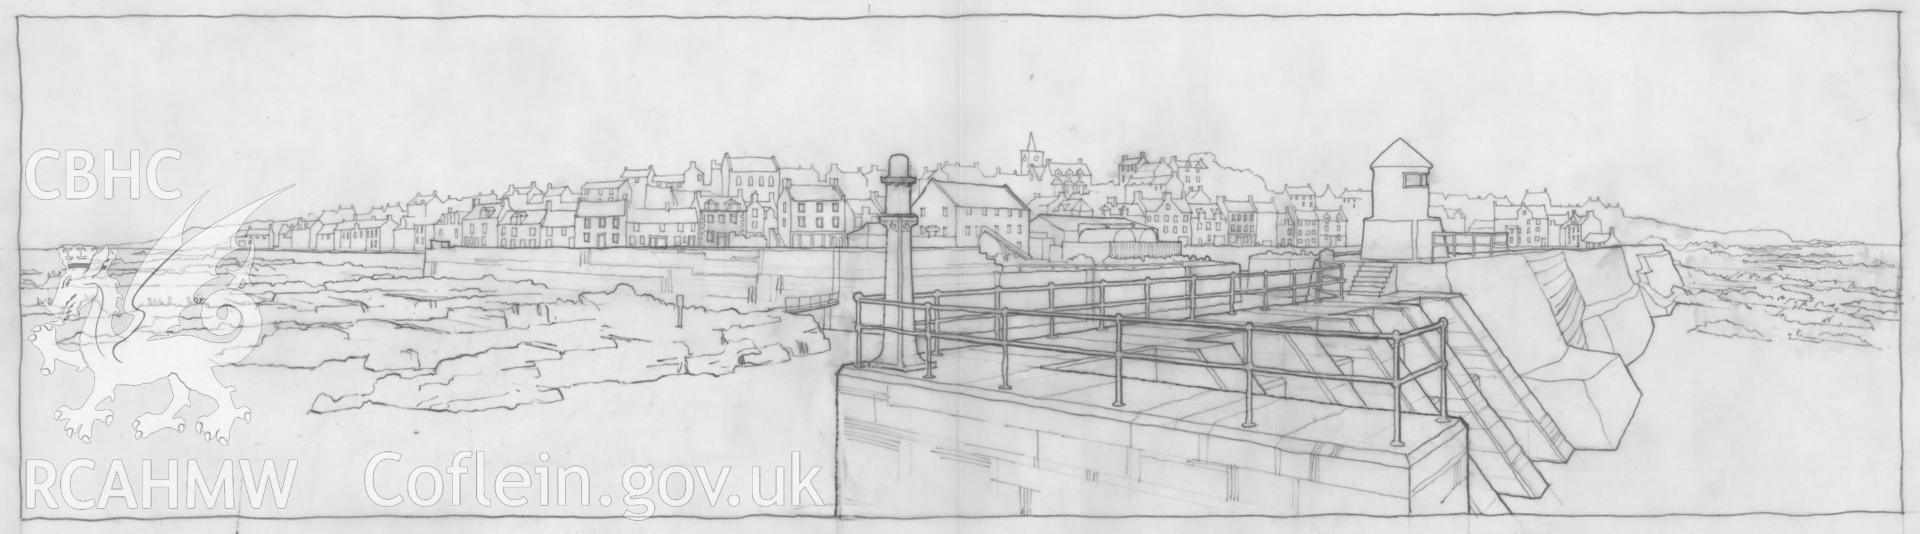 Pittenween, Scotland - Panorama from Harbour Entrance: (pencil) tracing from photograph.